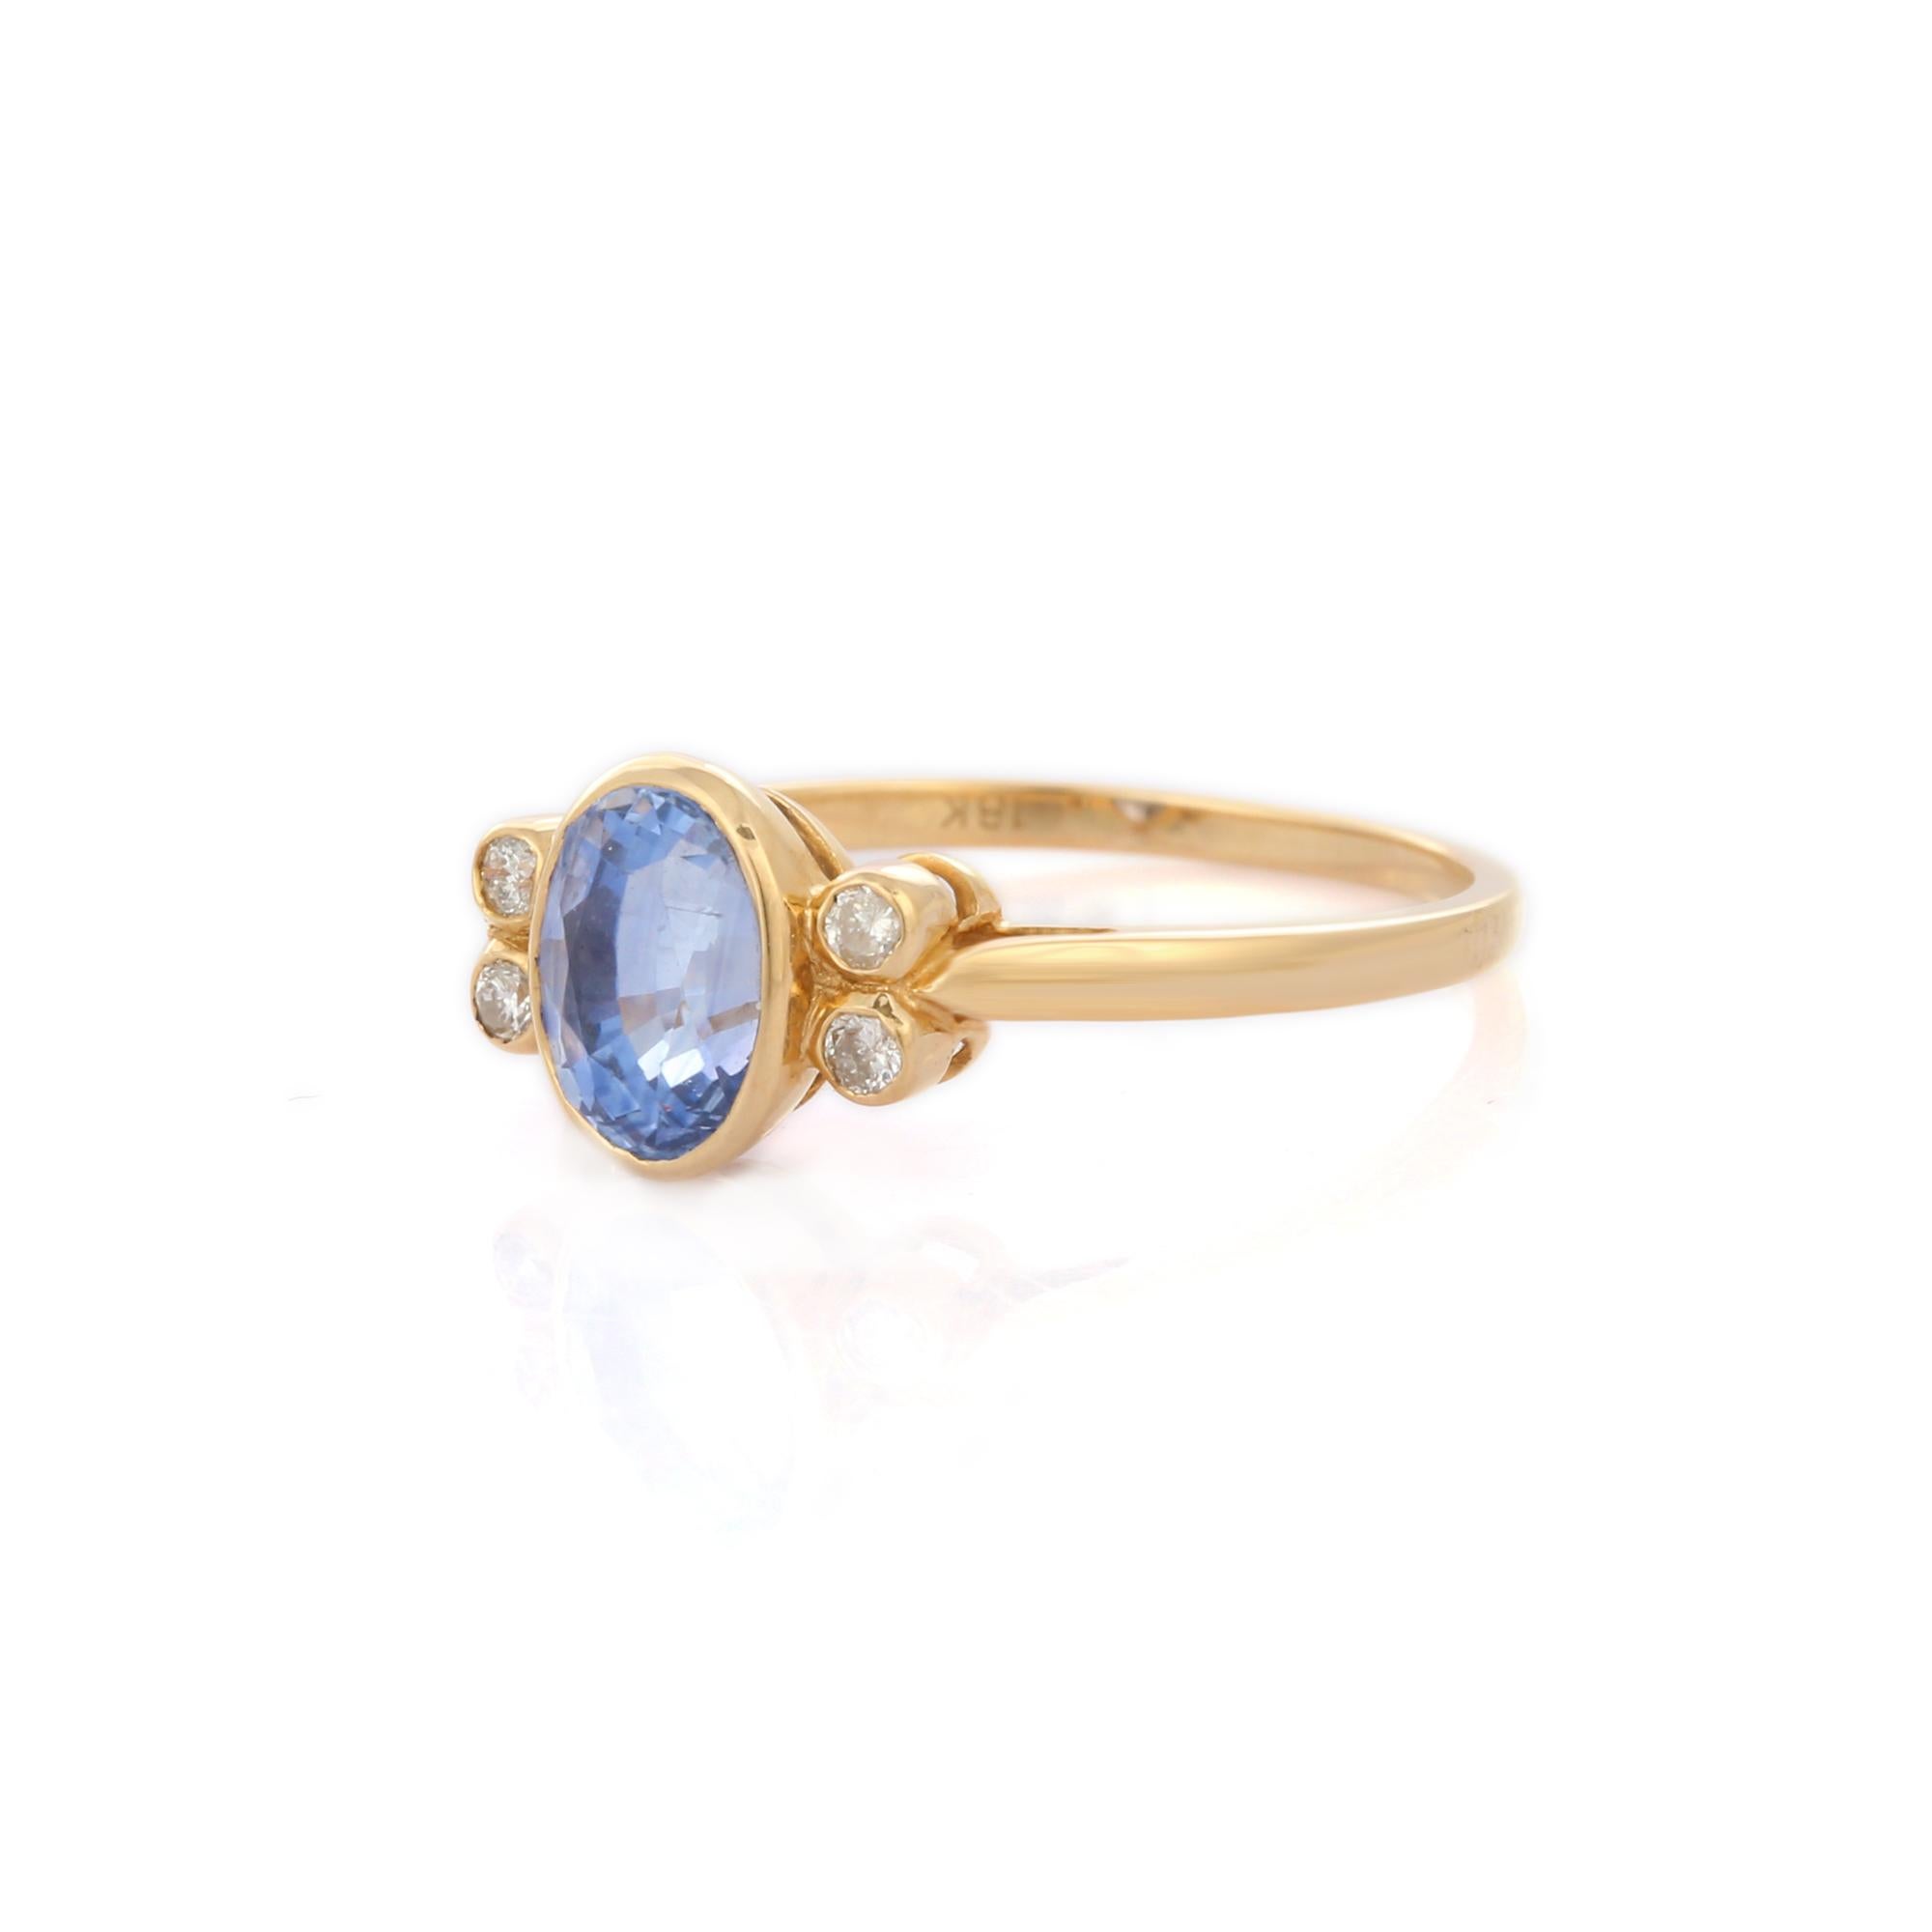 For Sale:  Blue Sapphire and Diamond Wedding Ring in 18K Yellow Gold 3